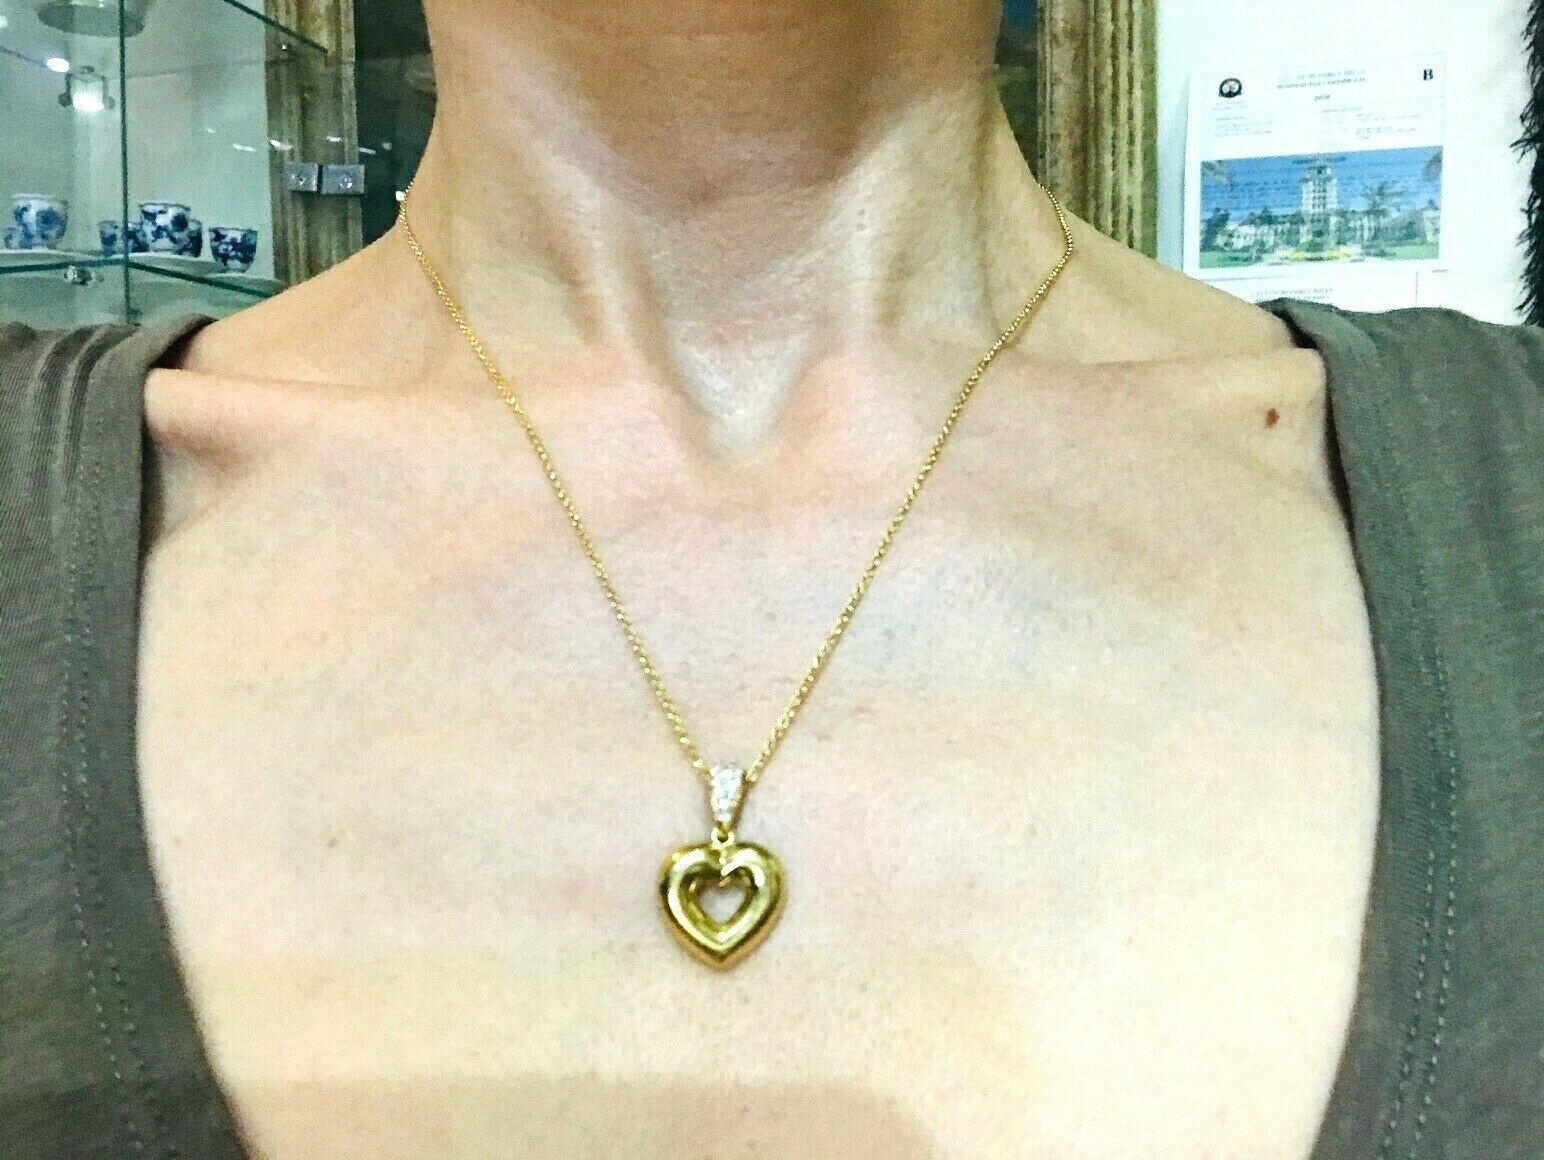 Vintage Chaumet Paris 18k yellow gold and diamond Heart pendant features 18k chain necklace.
Diamond carat weight is about 0.9 pts.
Stamped with Chaumet Paris maker's mark, a hallmark for 18k gold and a serial number.
Measurements: chain is 1/16